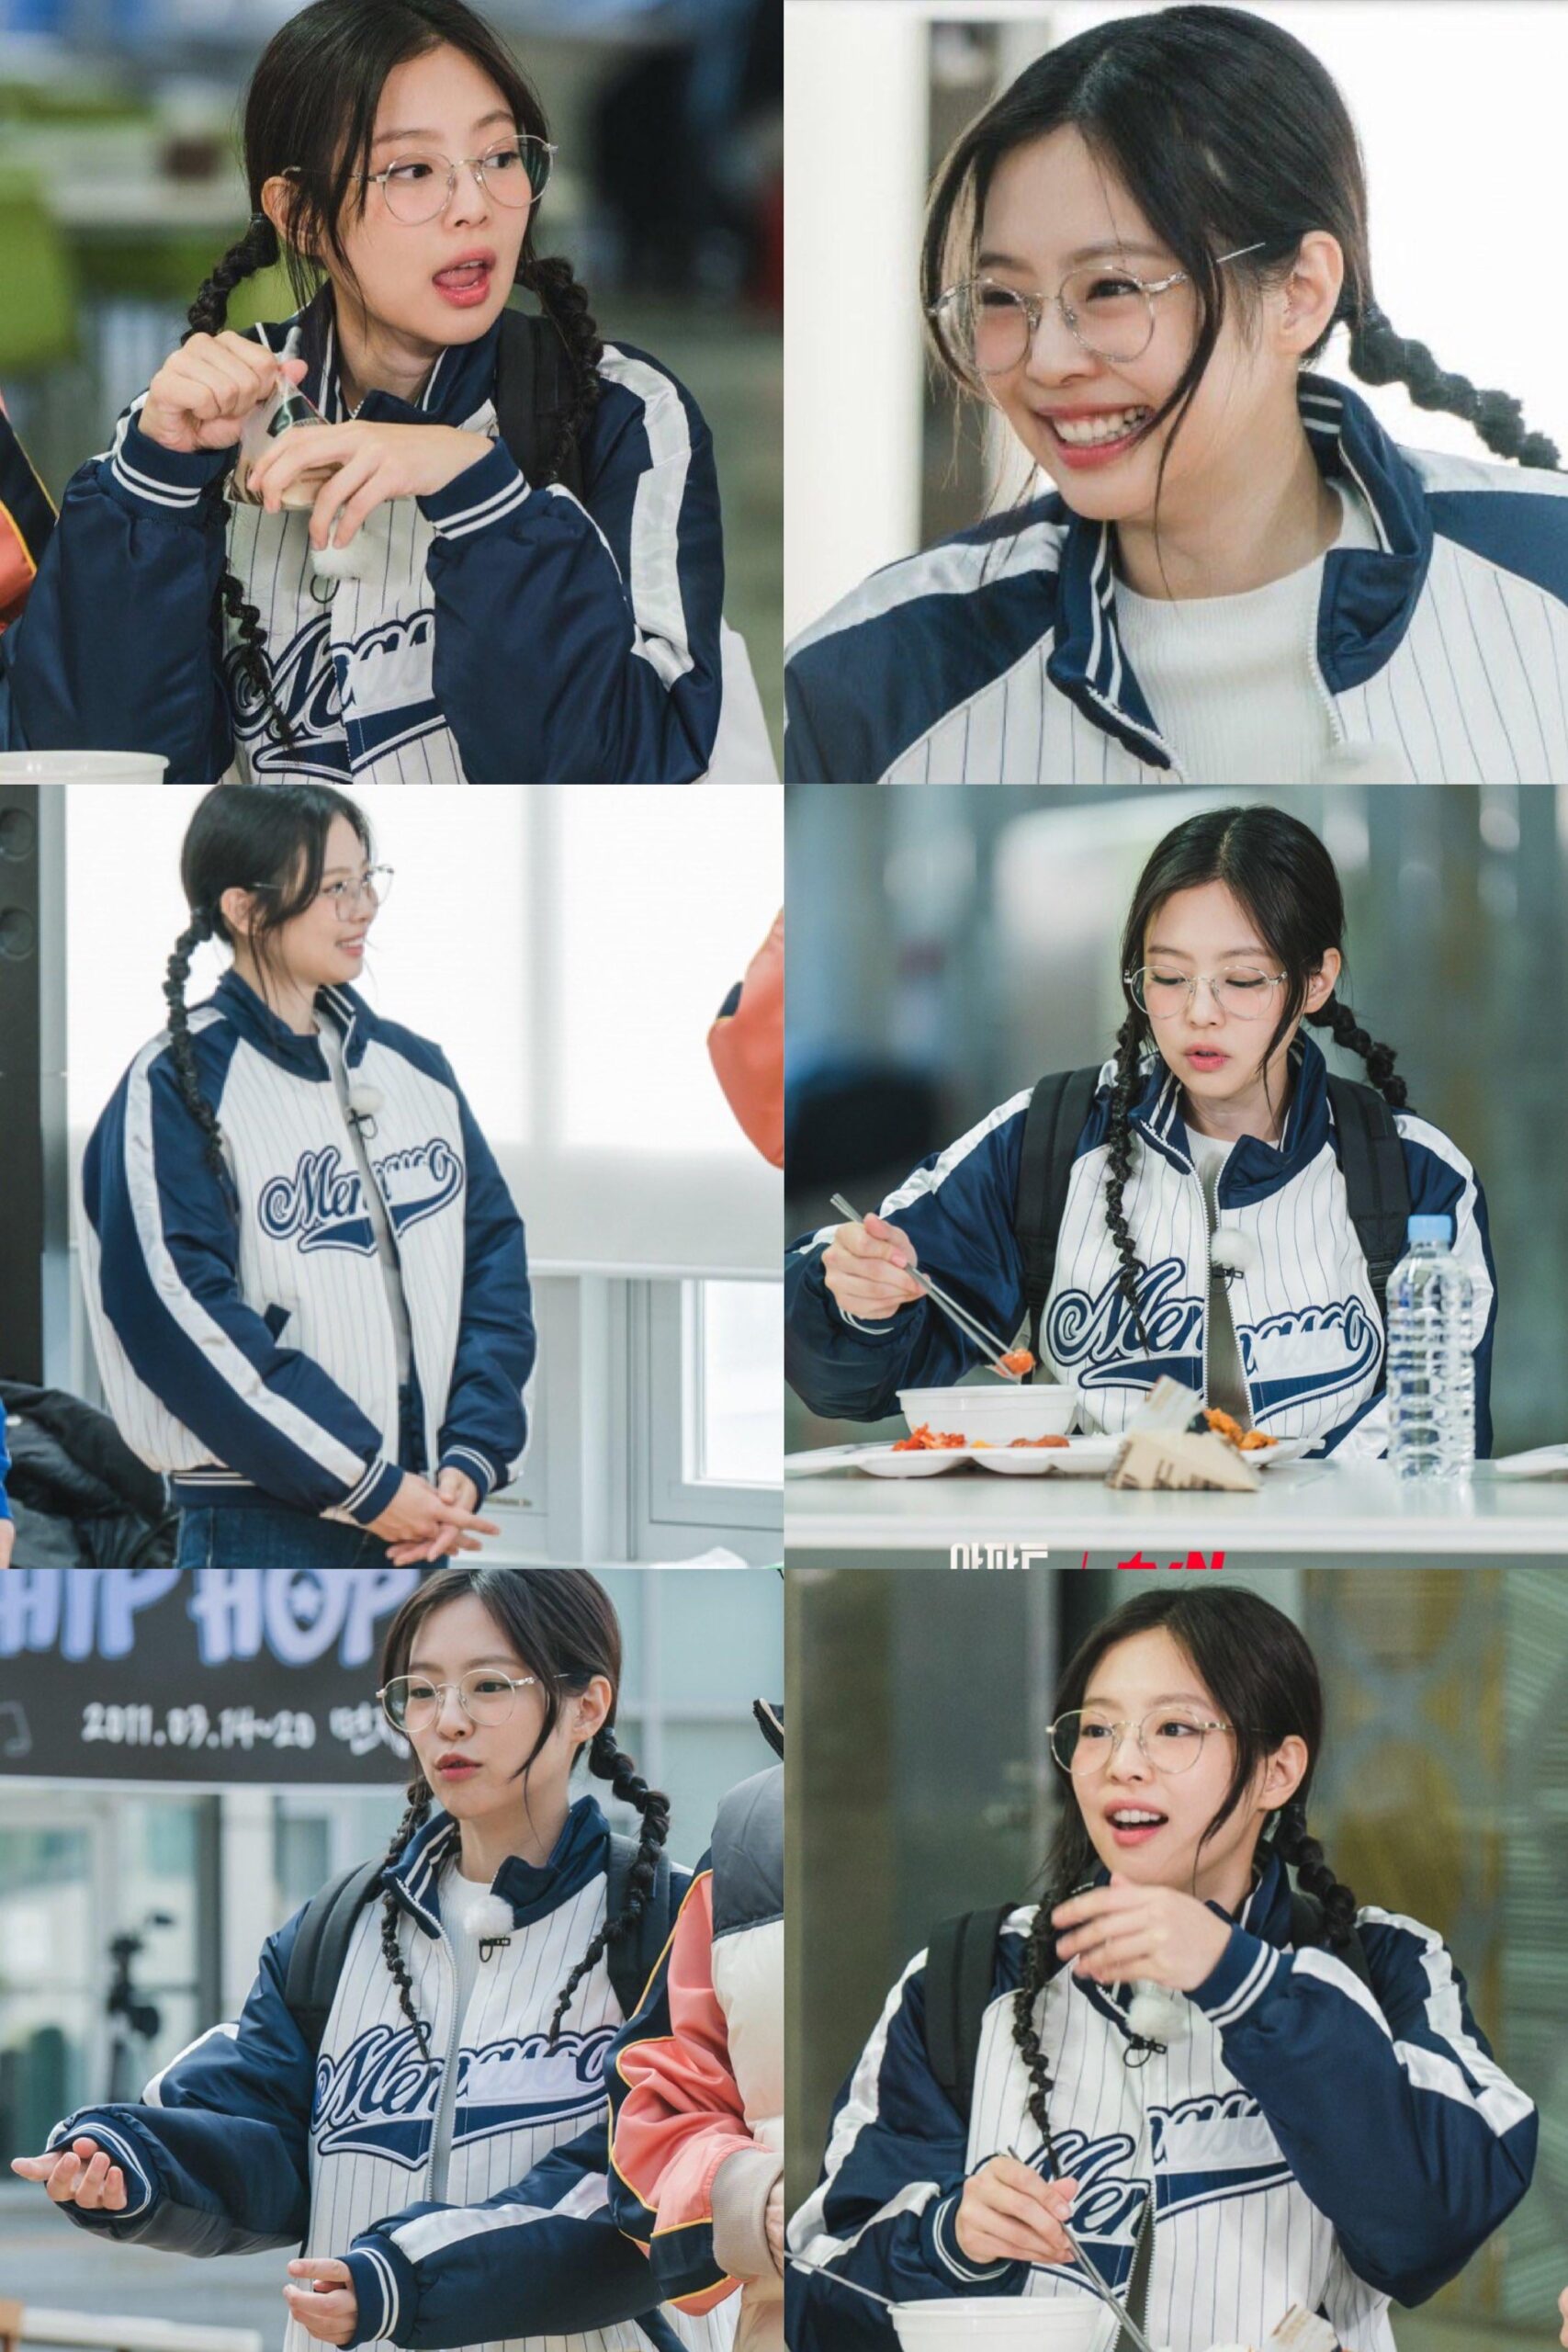 Jennie with glasses is too cute